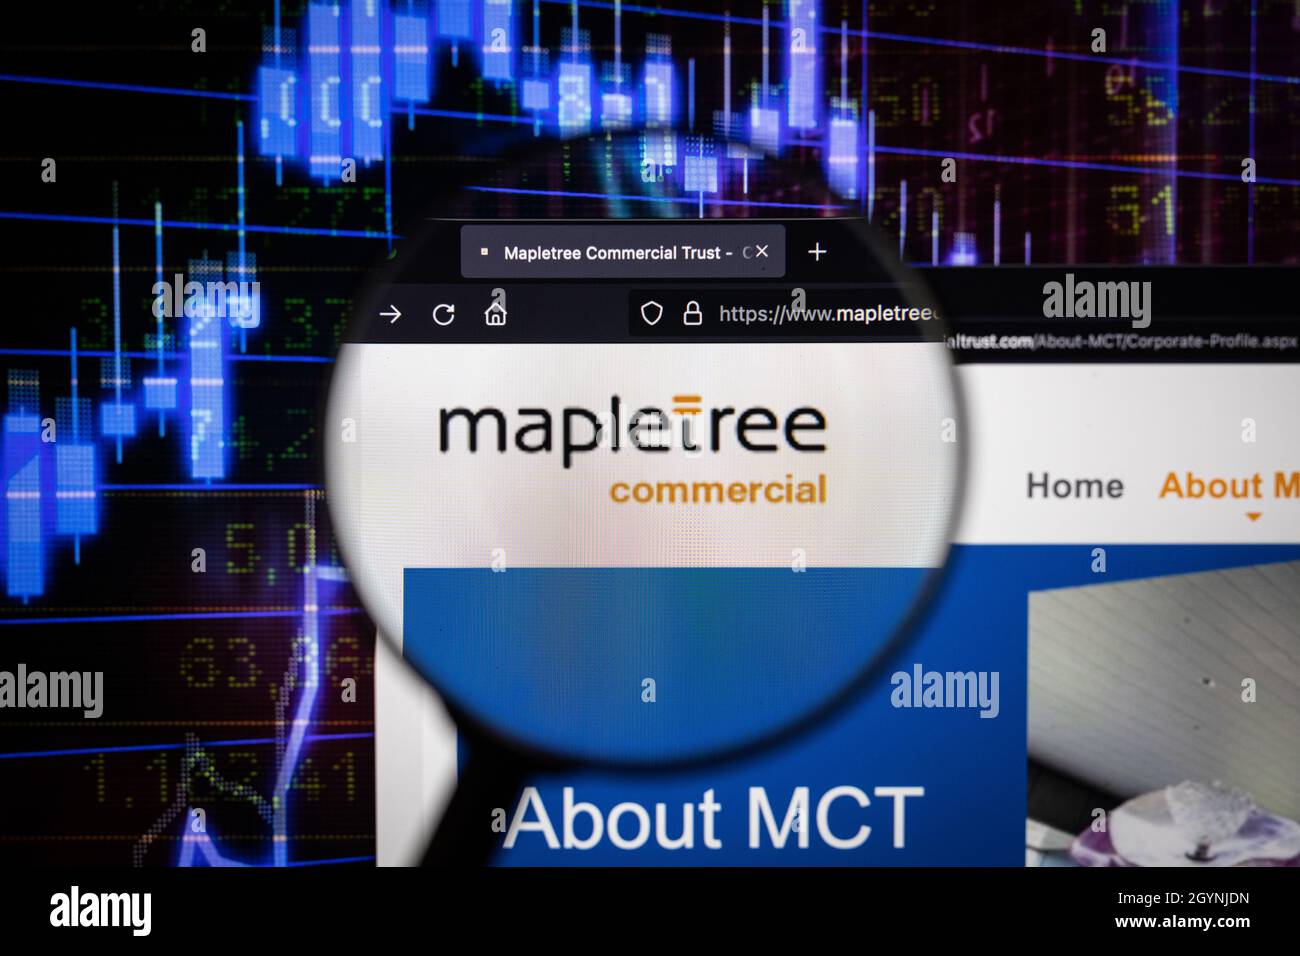 Mapletree company logo on a website with blurry stock market developments in the background, seen on a computer screen through a magnifying glass Stock Photo